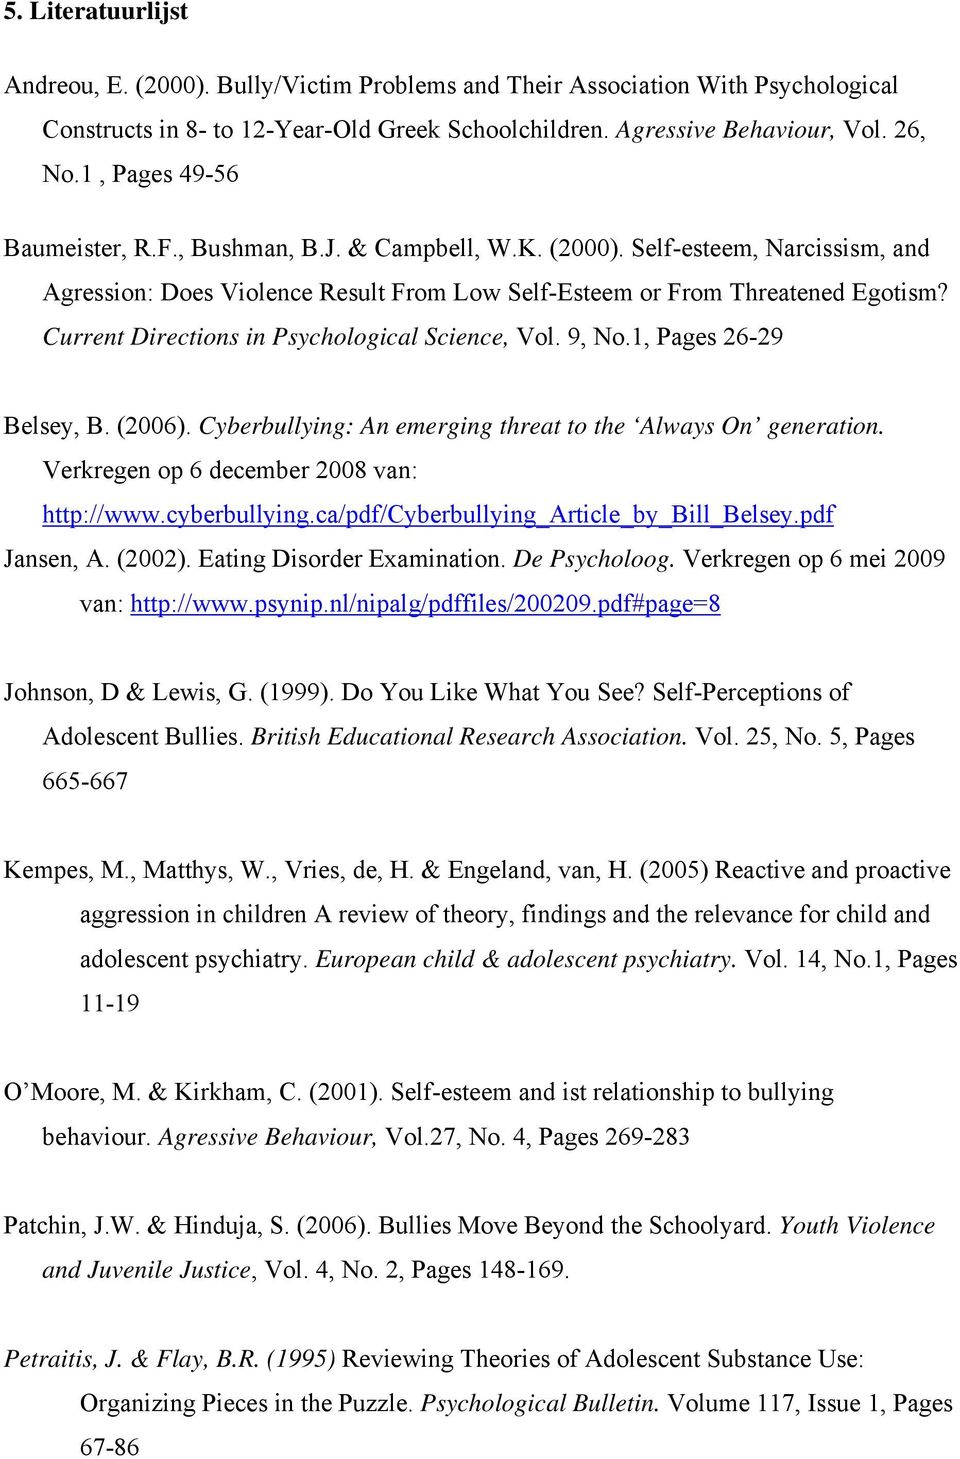 Current Directions in Psychological Science, Vol. 9, No.1, Pages 26-29 Belsey, B. (2006). Cyberbullying: An emerging threat to the Always On generation. Verkregen op 6 december 2008 van: http://www.